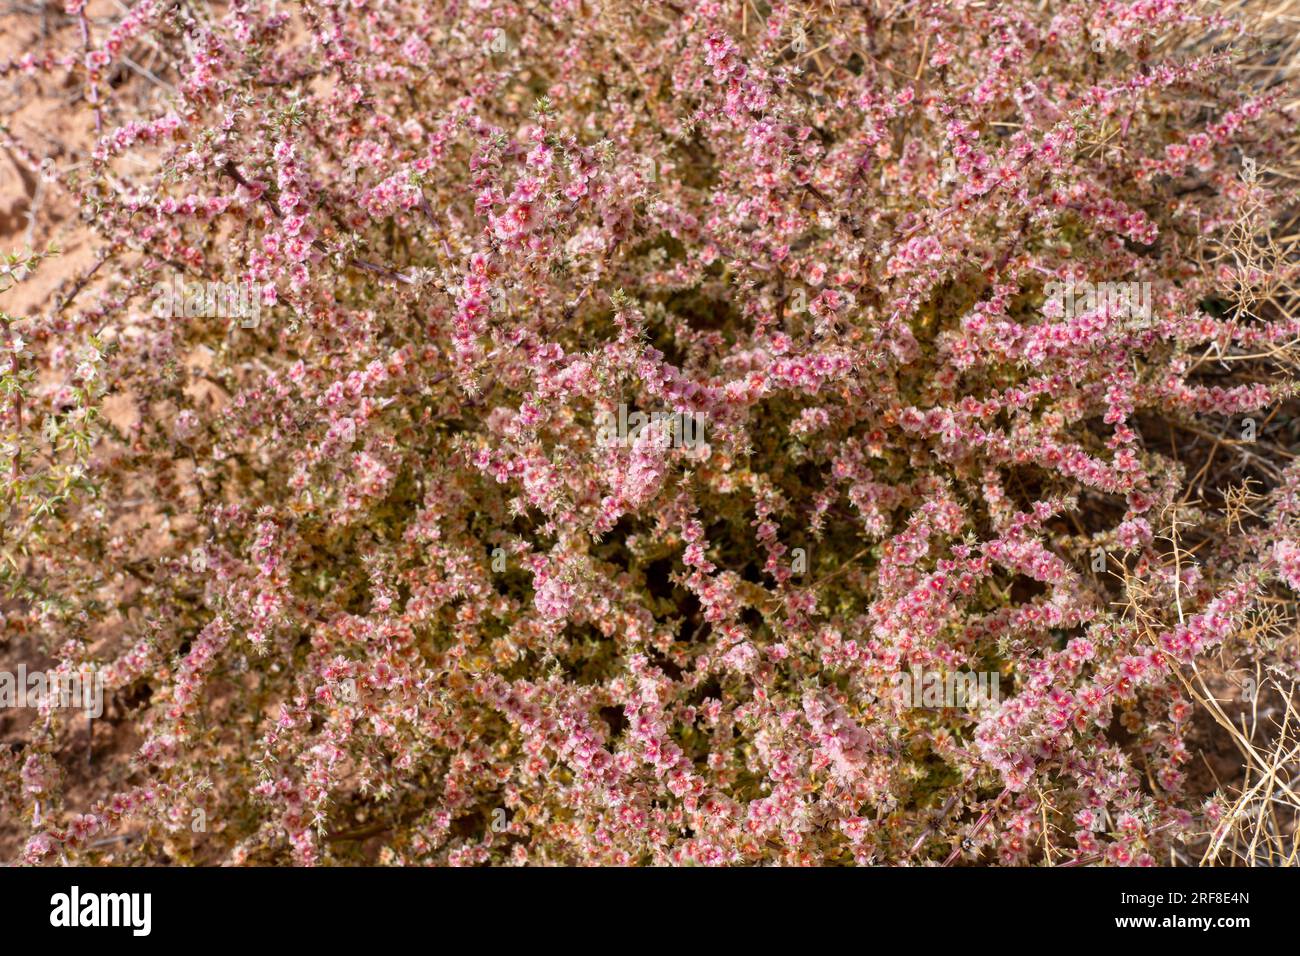 A Prickly Russian Thistle, Kali tragus, in flower in the desert in Utah. Stock Photo